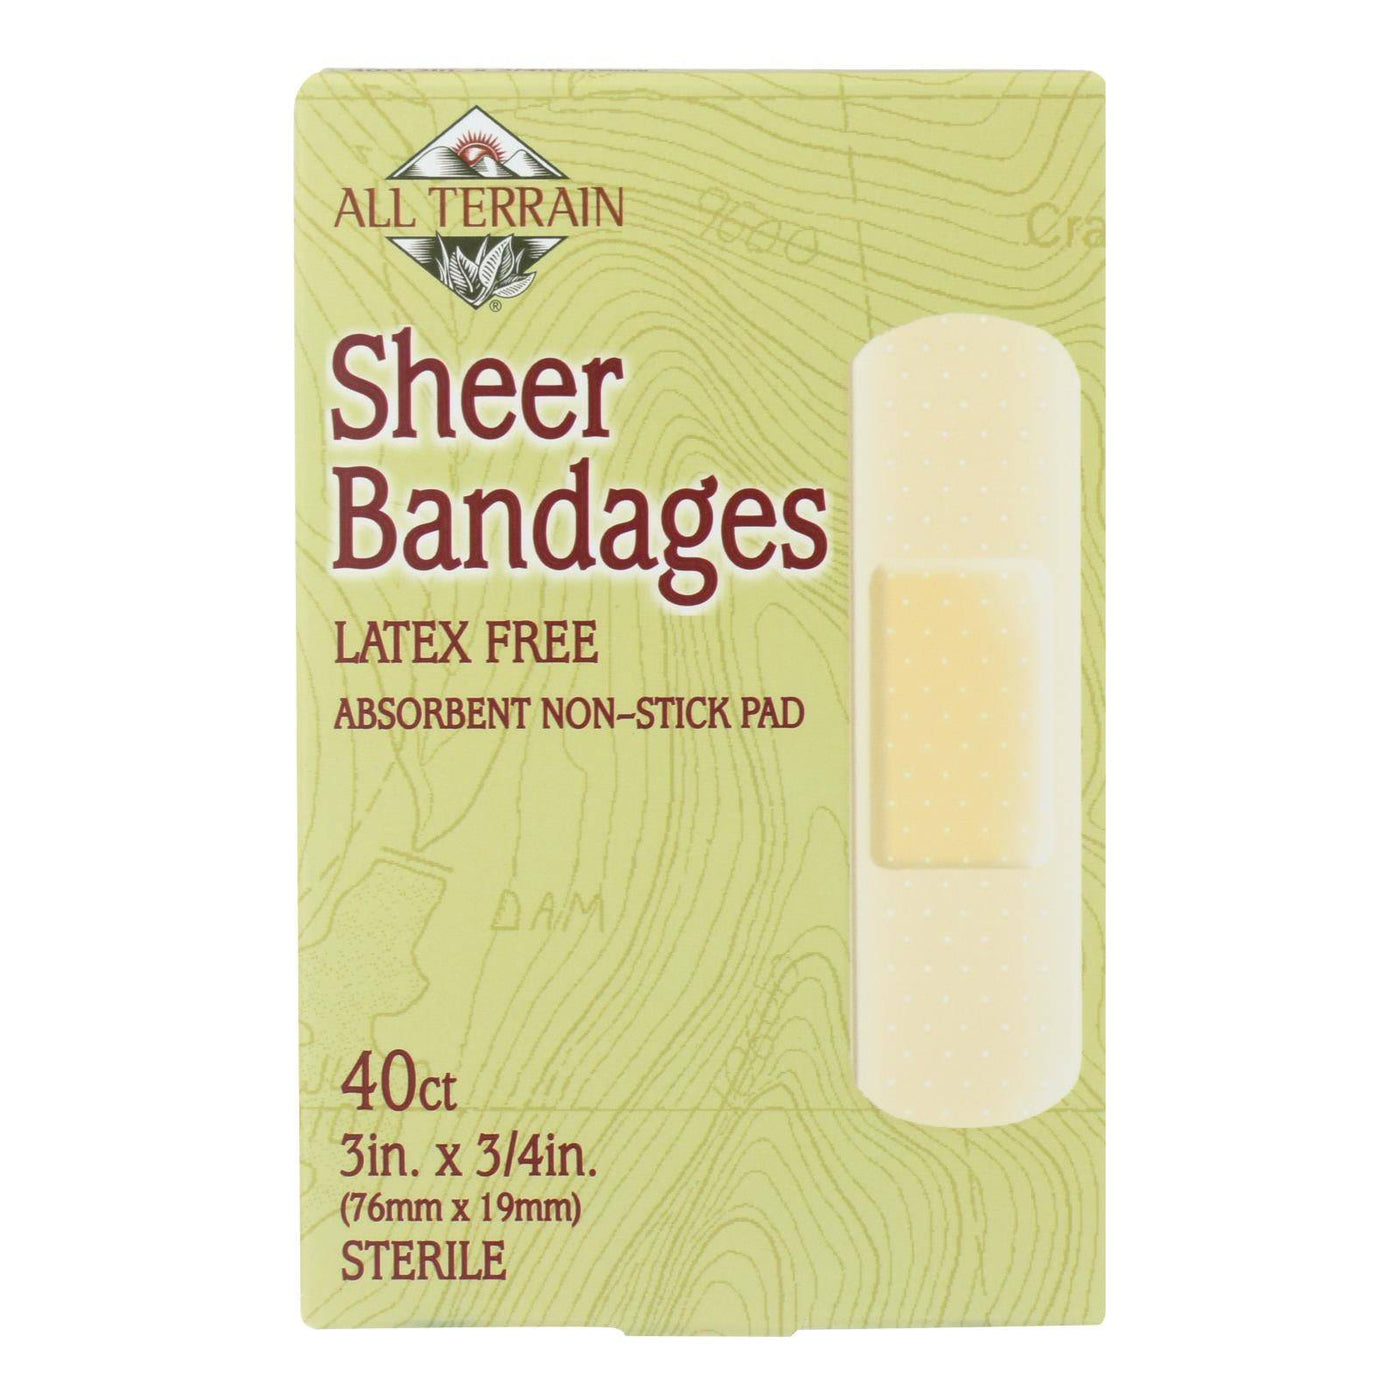 All Terrain - Bandages - Sheer - 3-4 In X 3 In - 40 Ct | OnlyNaturals.us